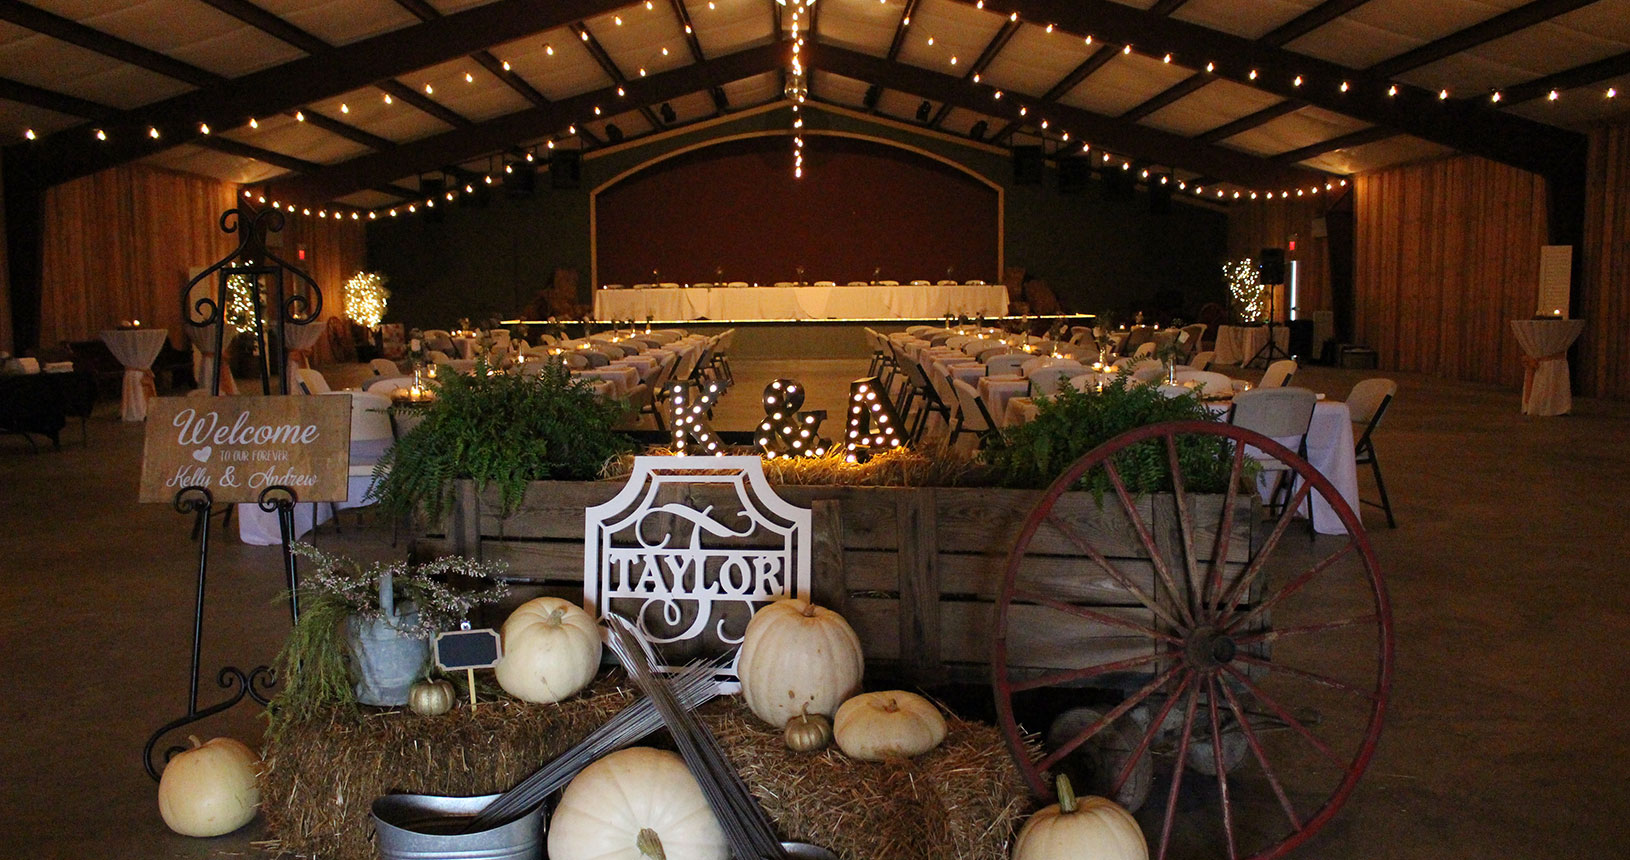 A barn with hay and pumpkins for sale.